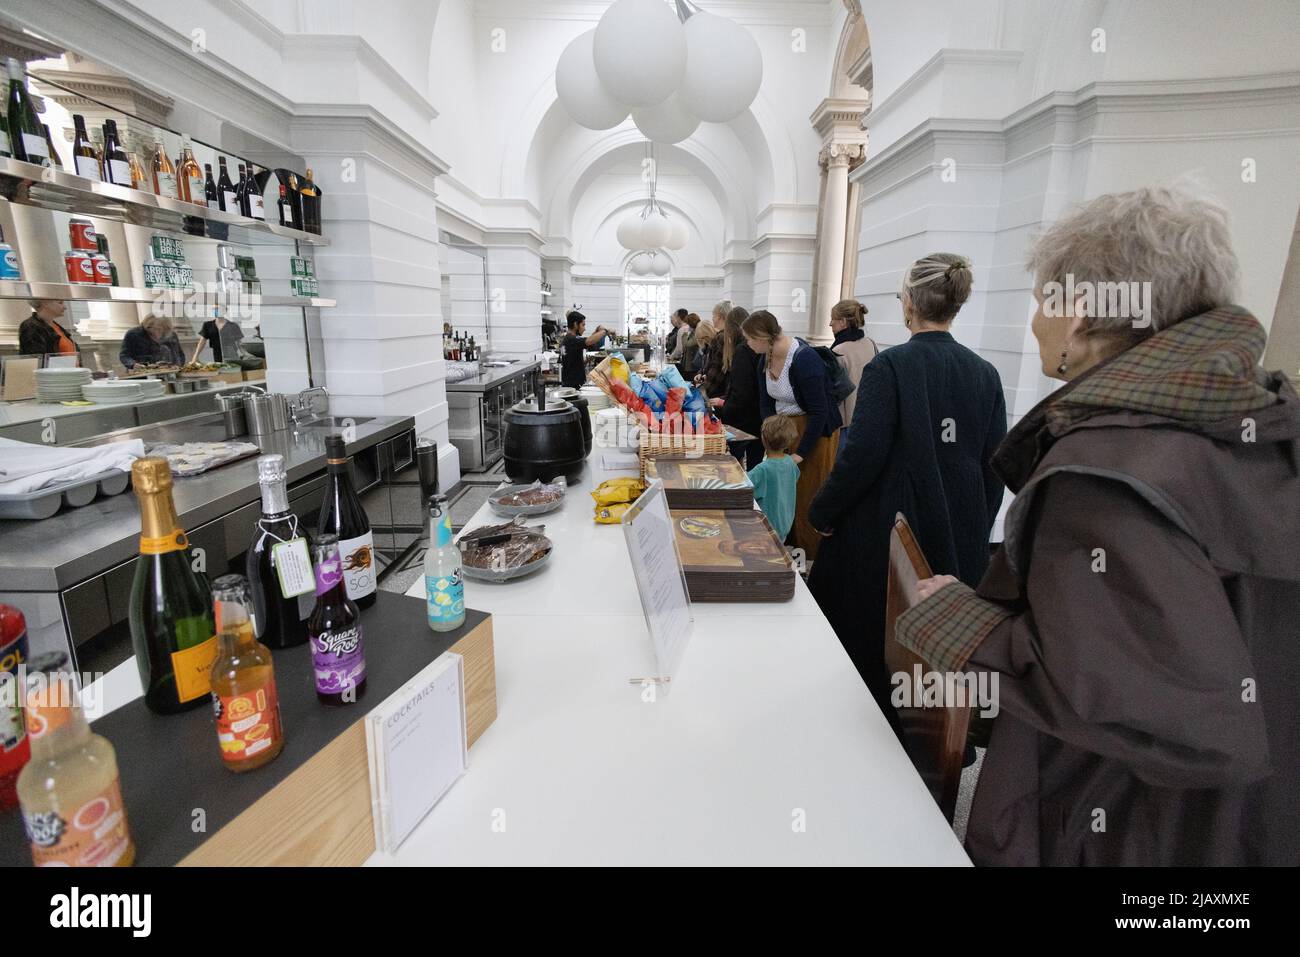 Tate Britain members restaurant interior; people at the counter waiting for food and drink, Tate Britain art gallery, Millbank, Pimlico London UK Stock Photo